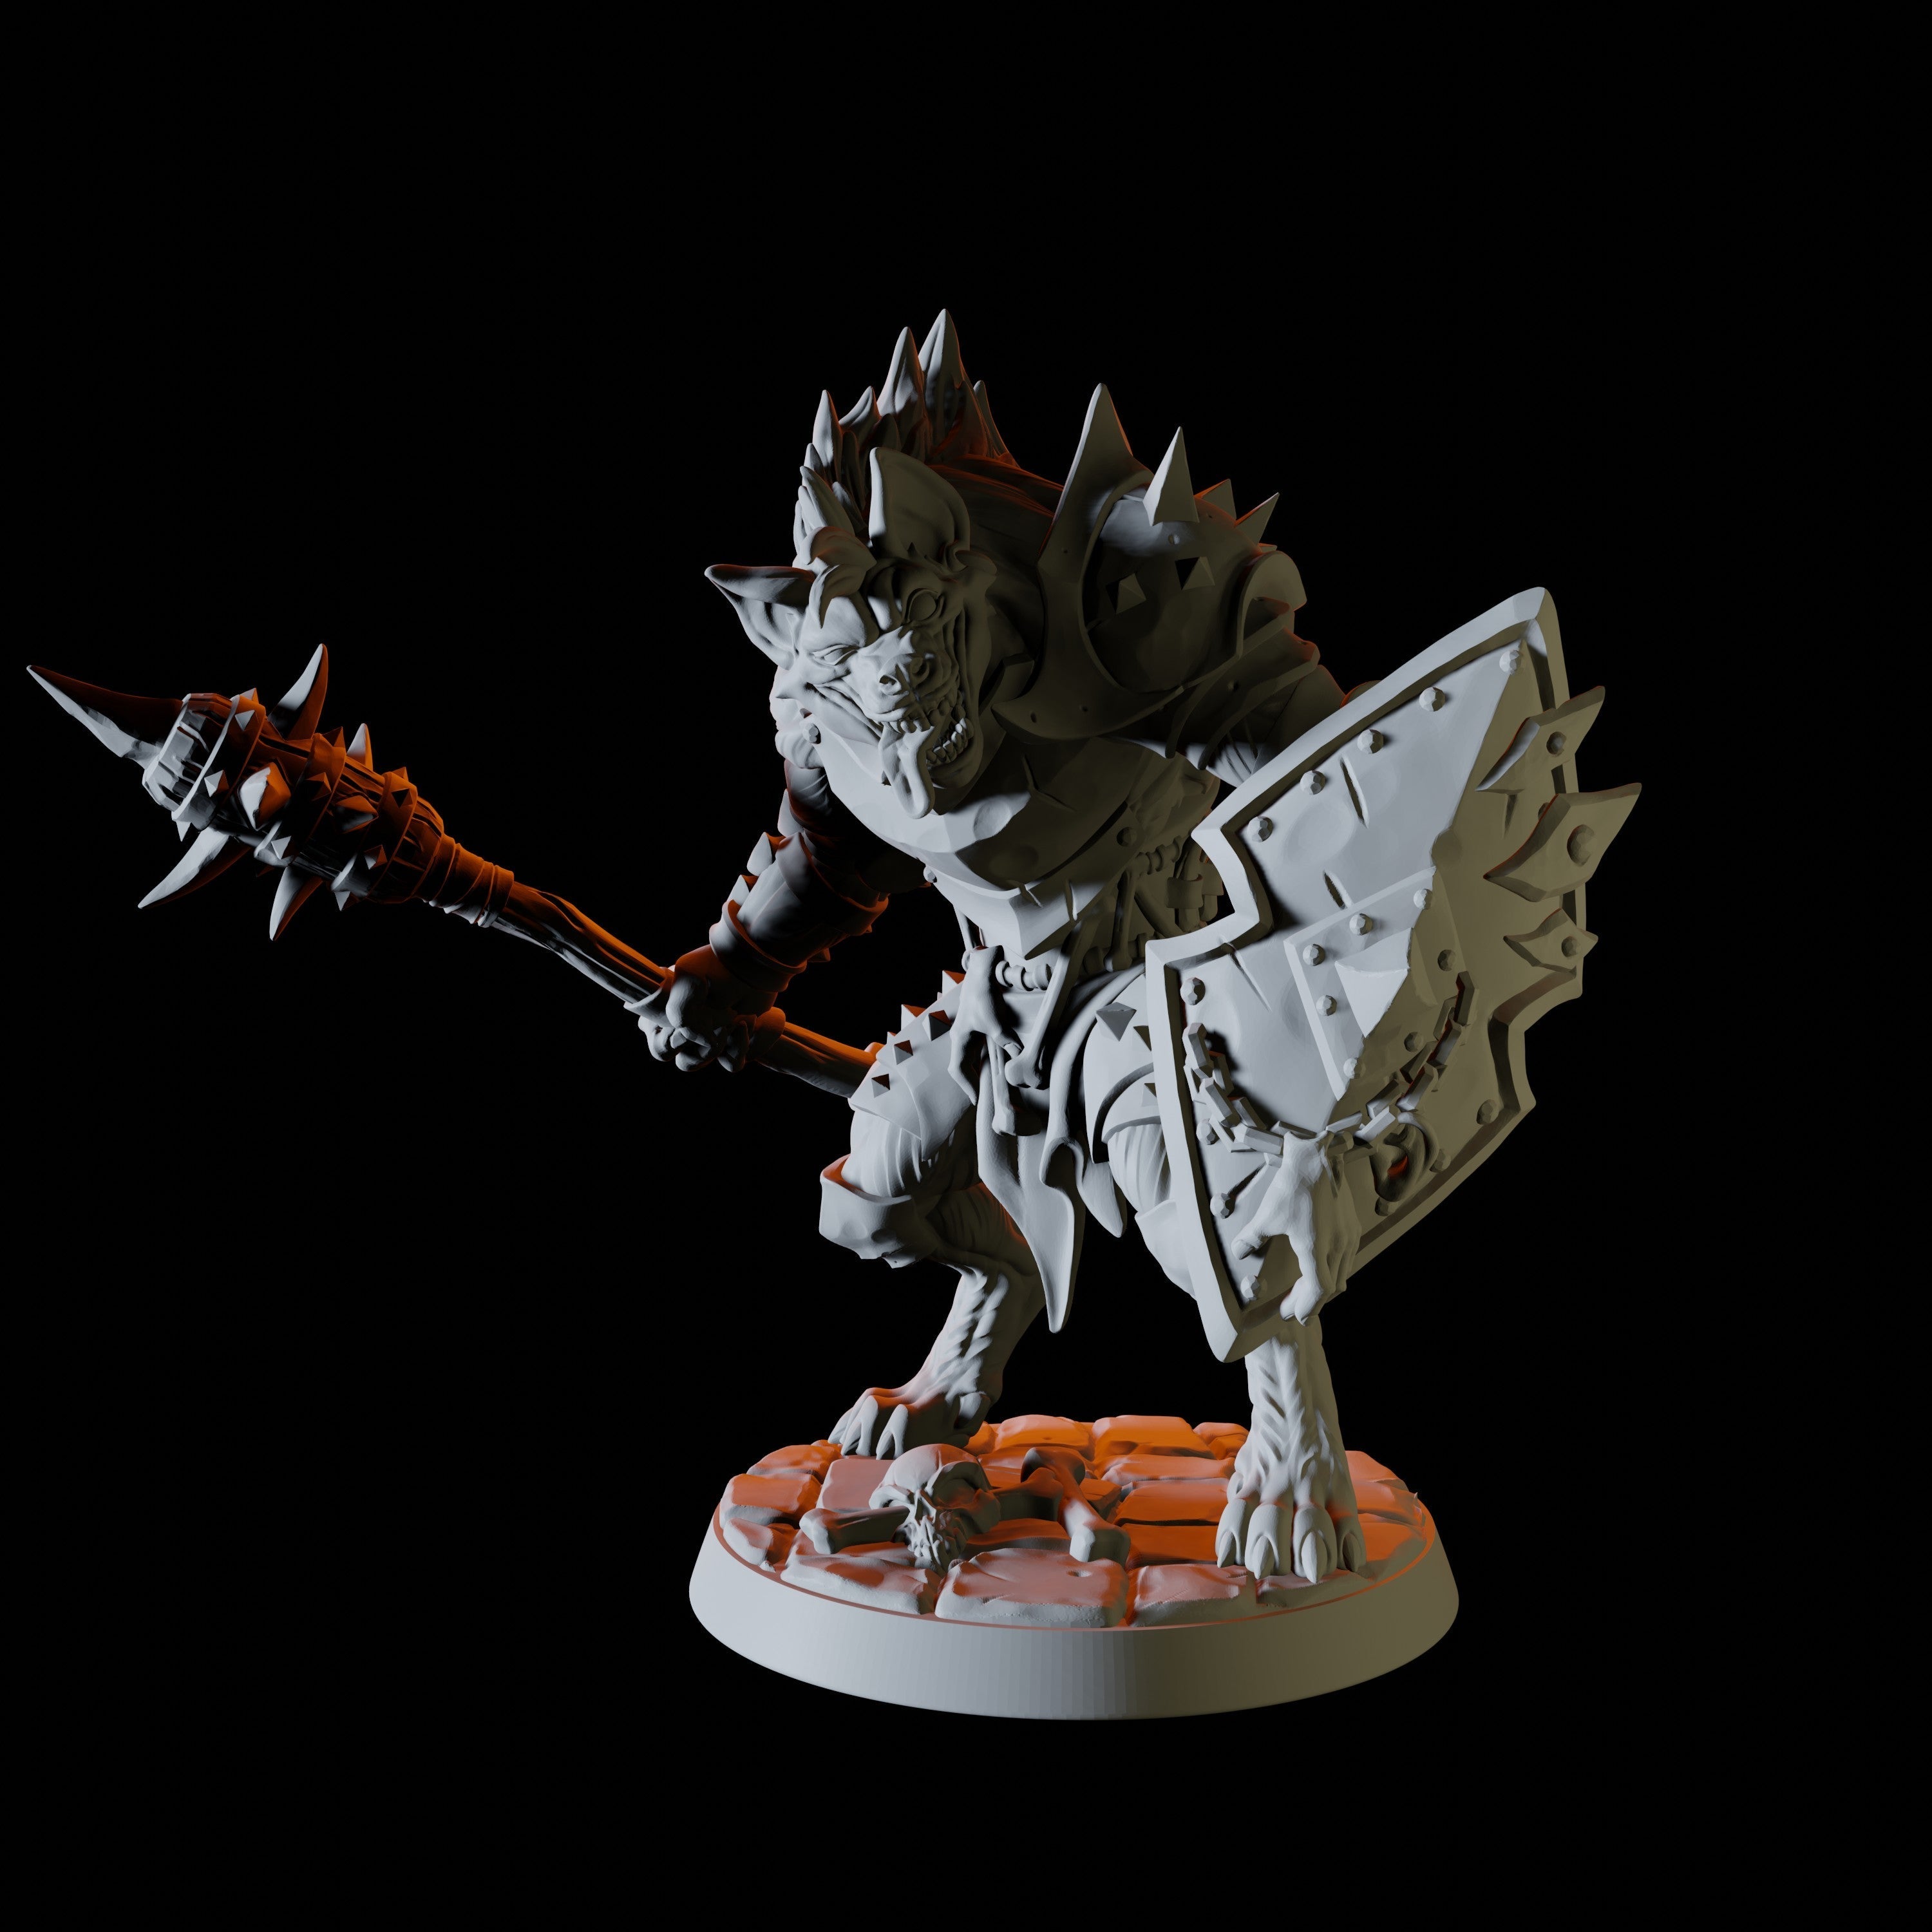 Six Gnoll Miniatures for Dungeons and Dragons - Myth Forged